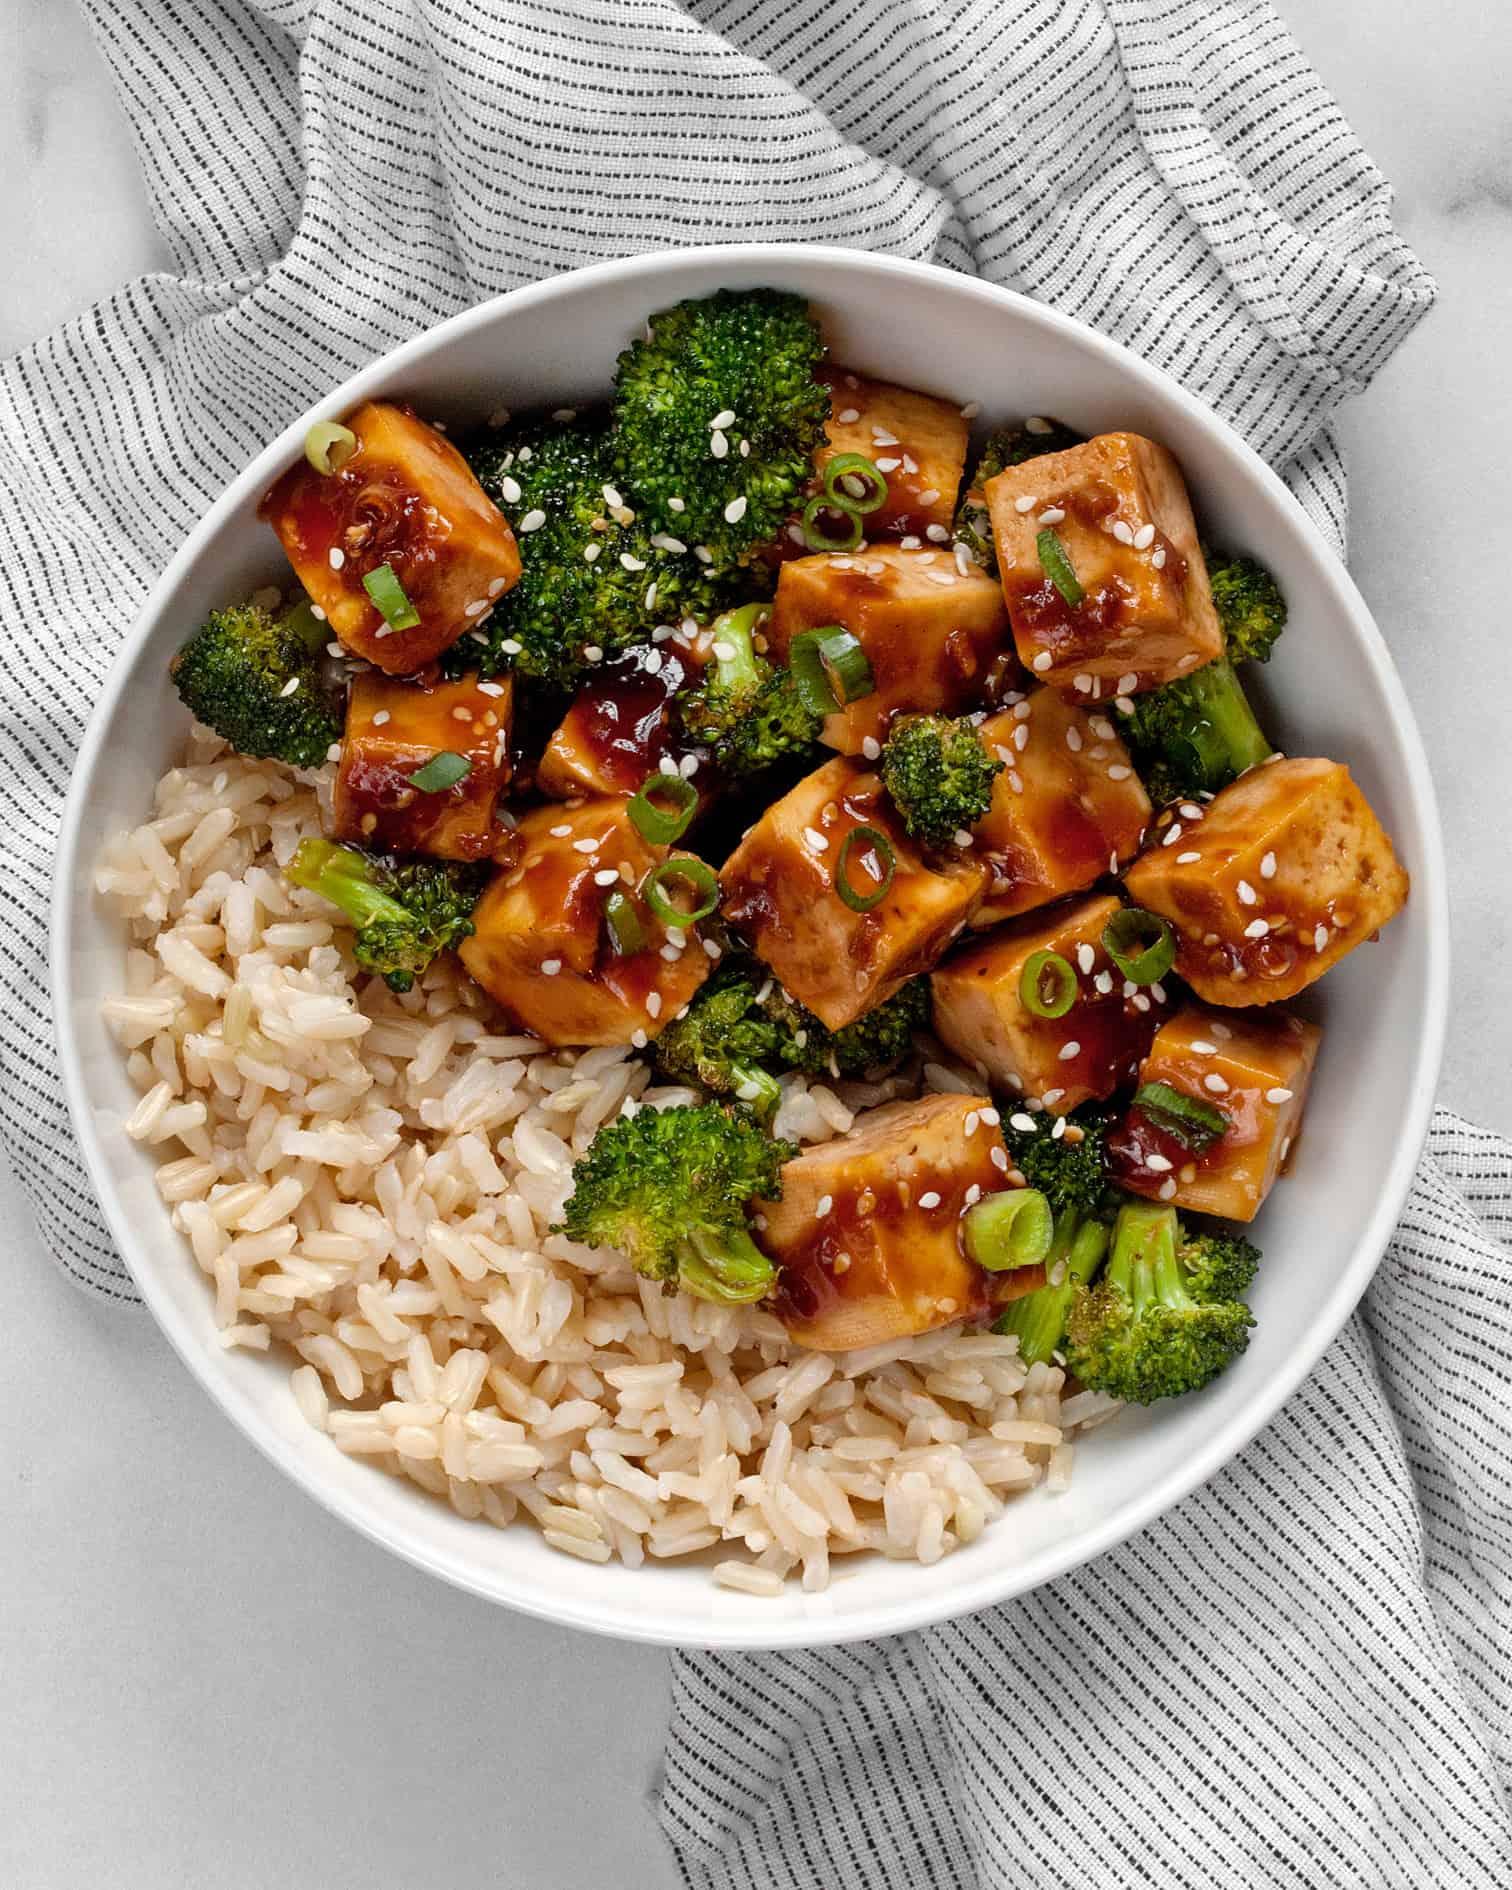 Honey garlic tofu and broccoli in a bowl with brown rice